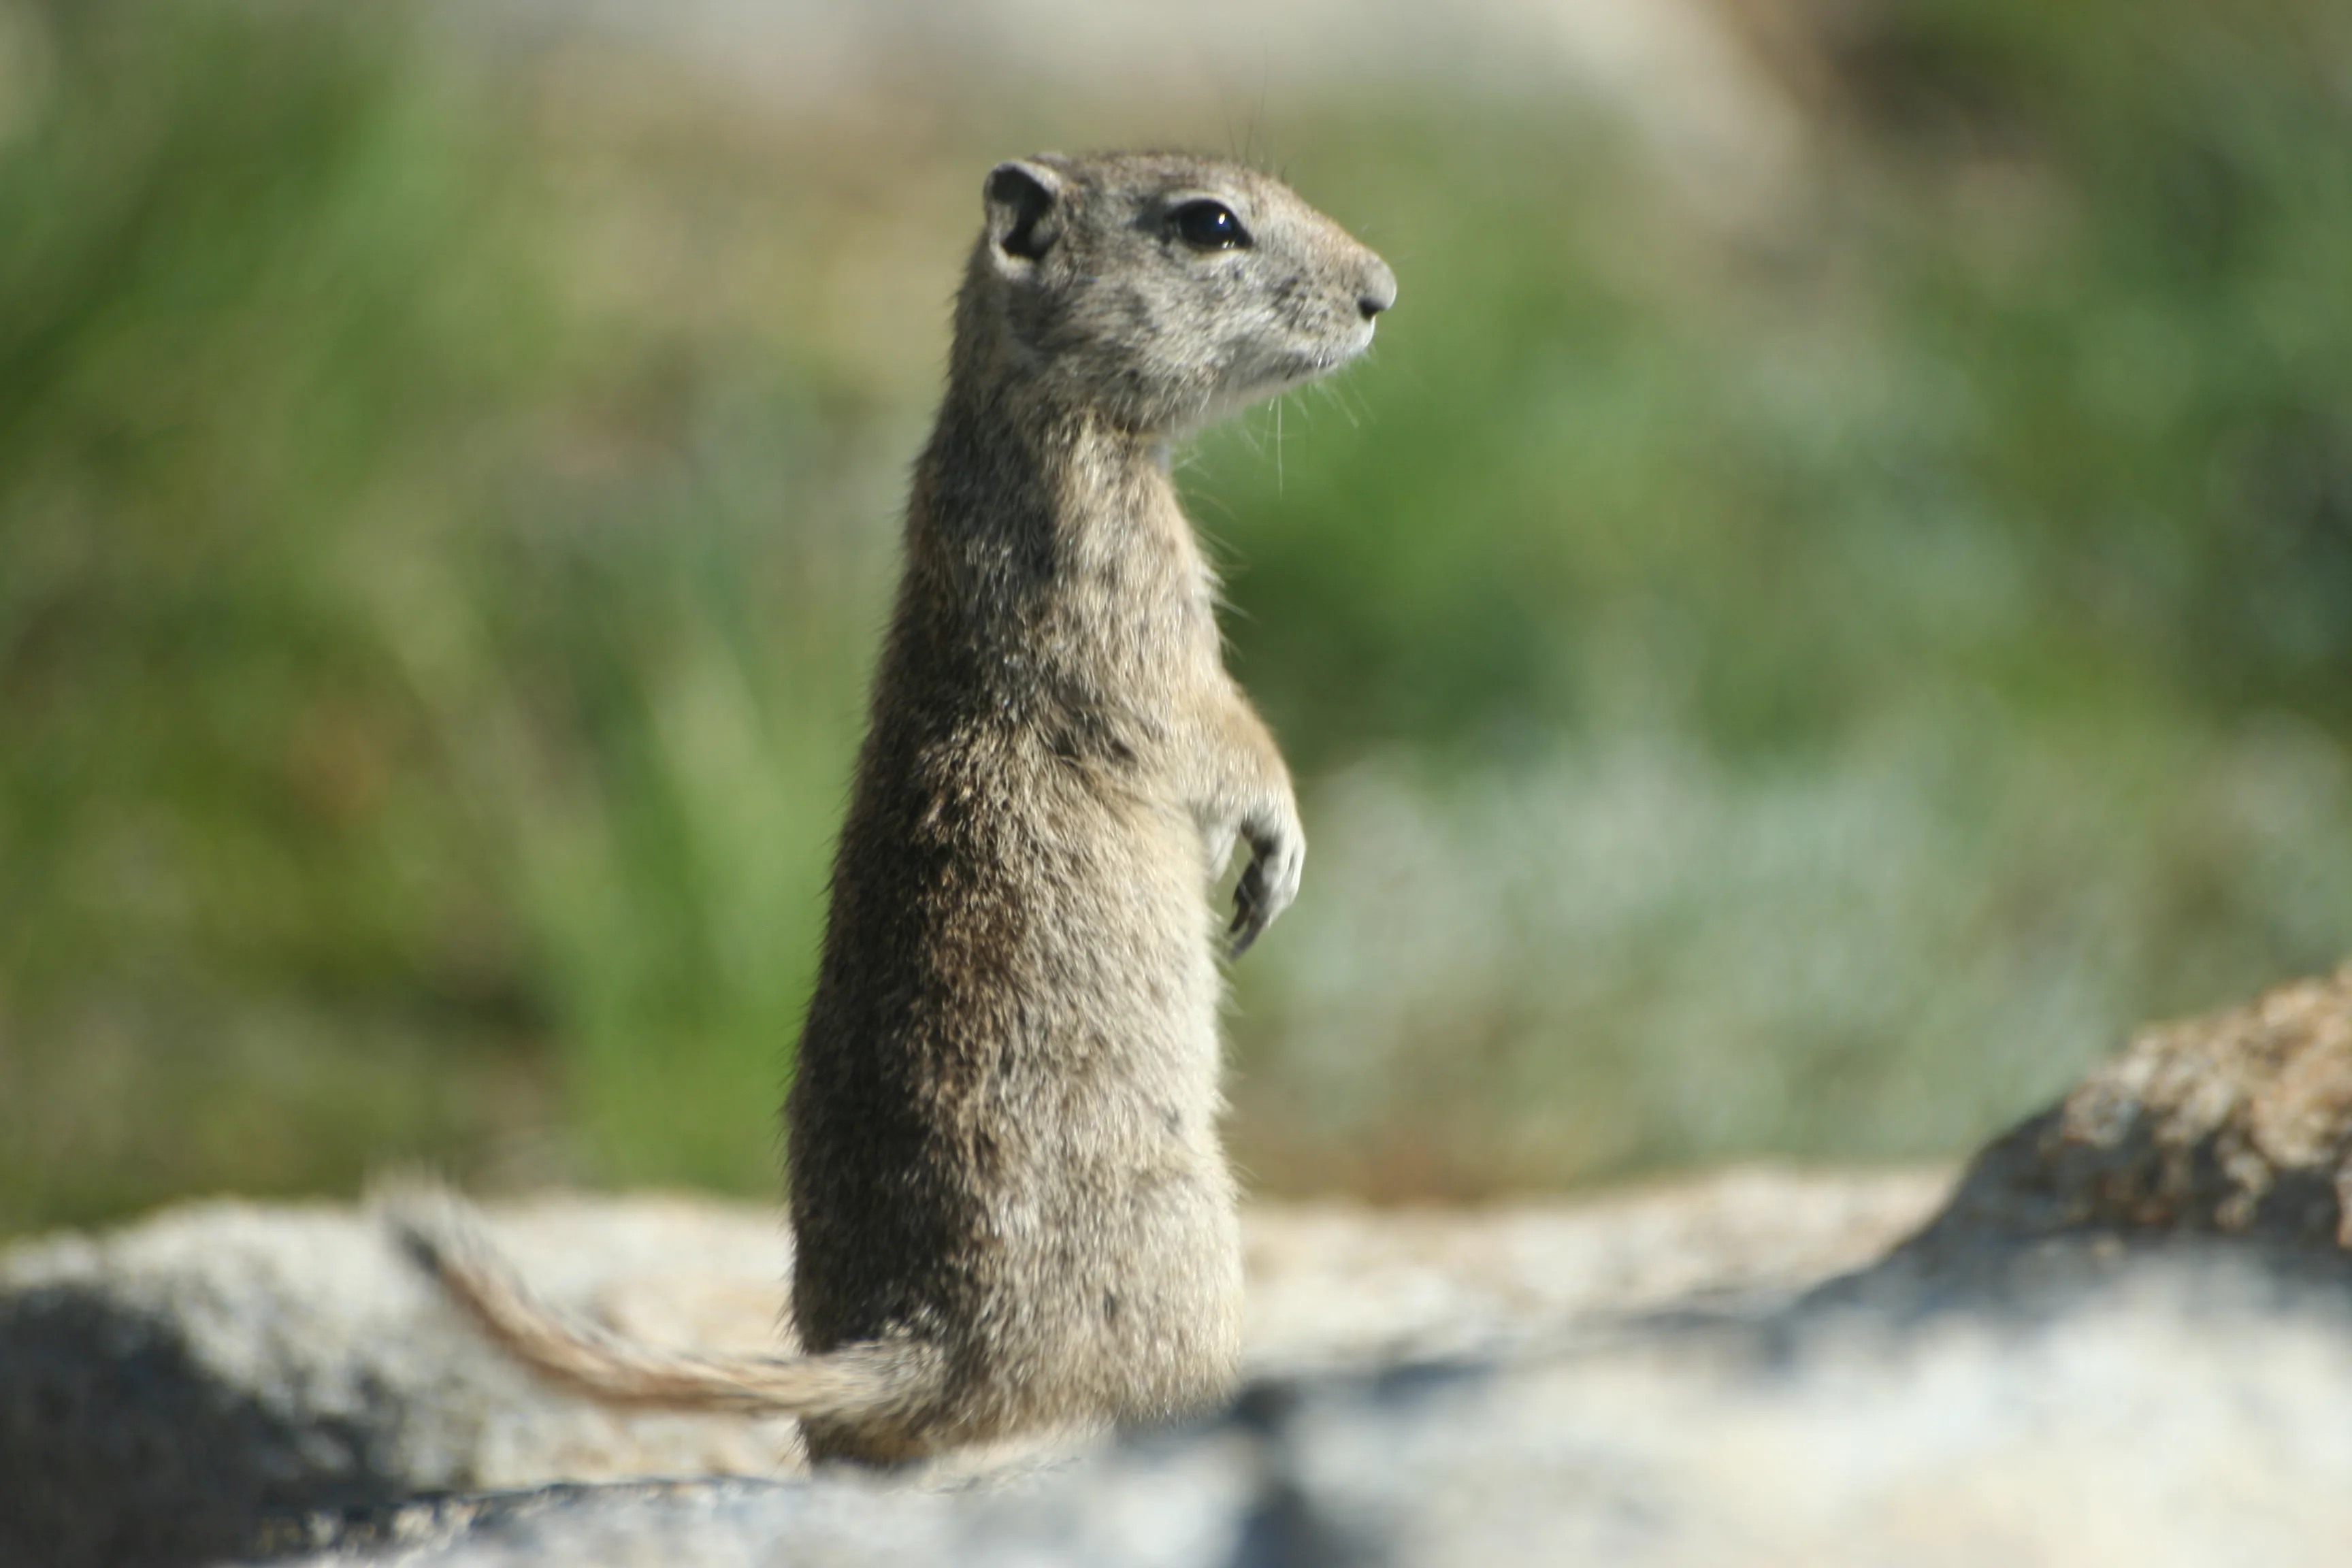 Belding’s ground squirrels favor wet vegetation in the mountains. (Toni Lyn Morelli)